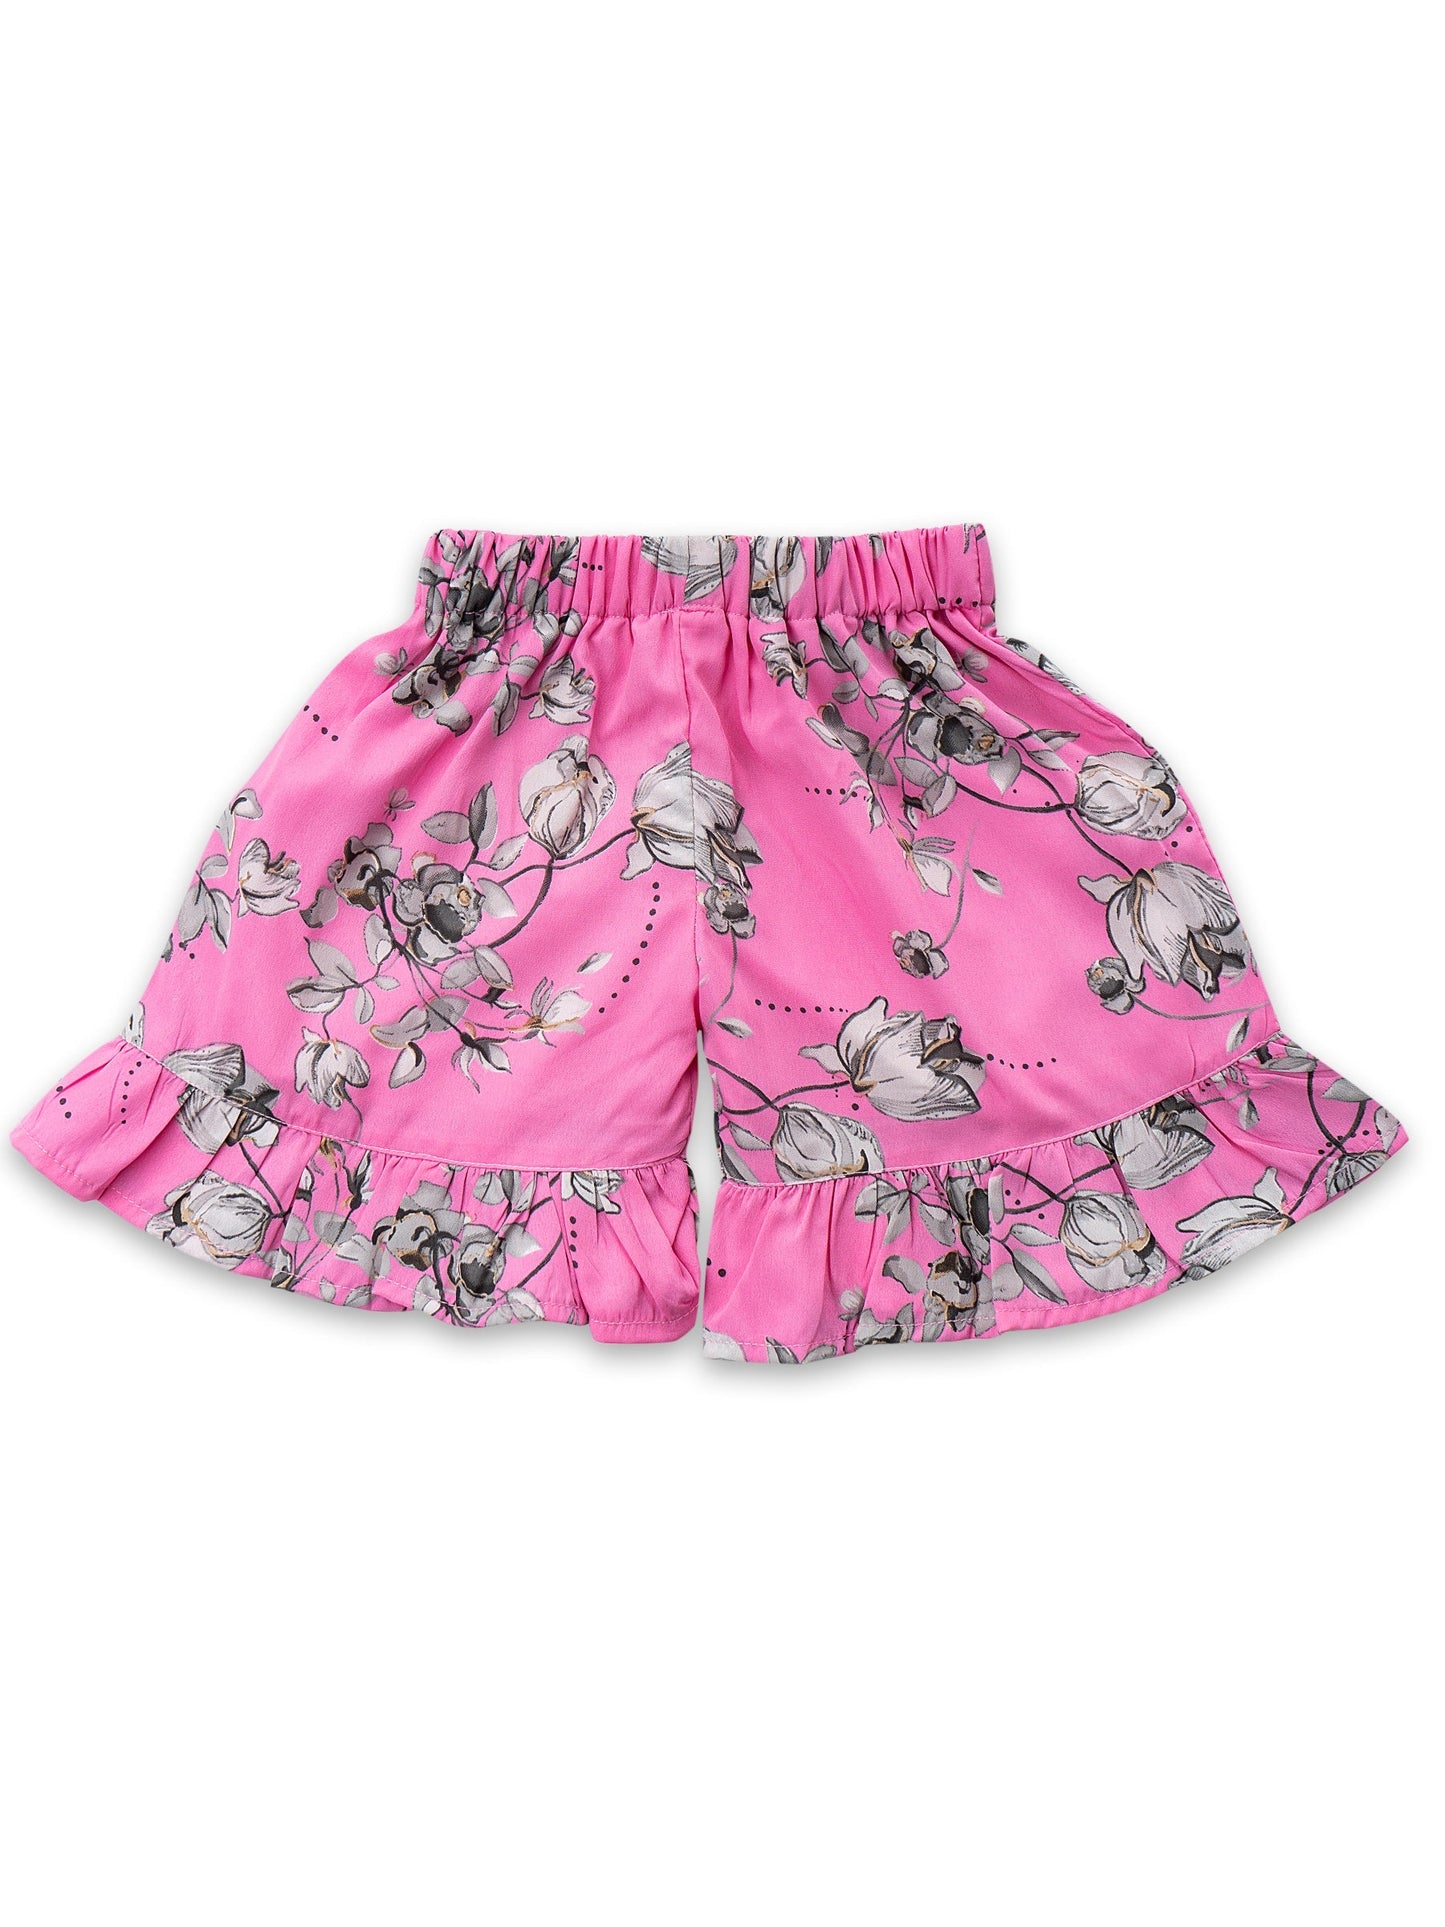 Girls Pink Floral Top and Short Set